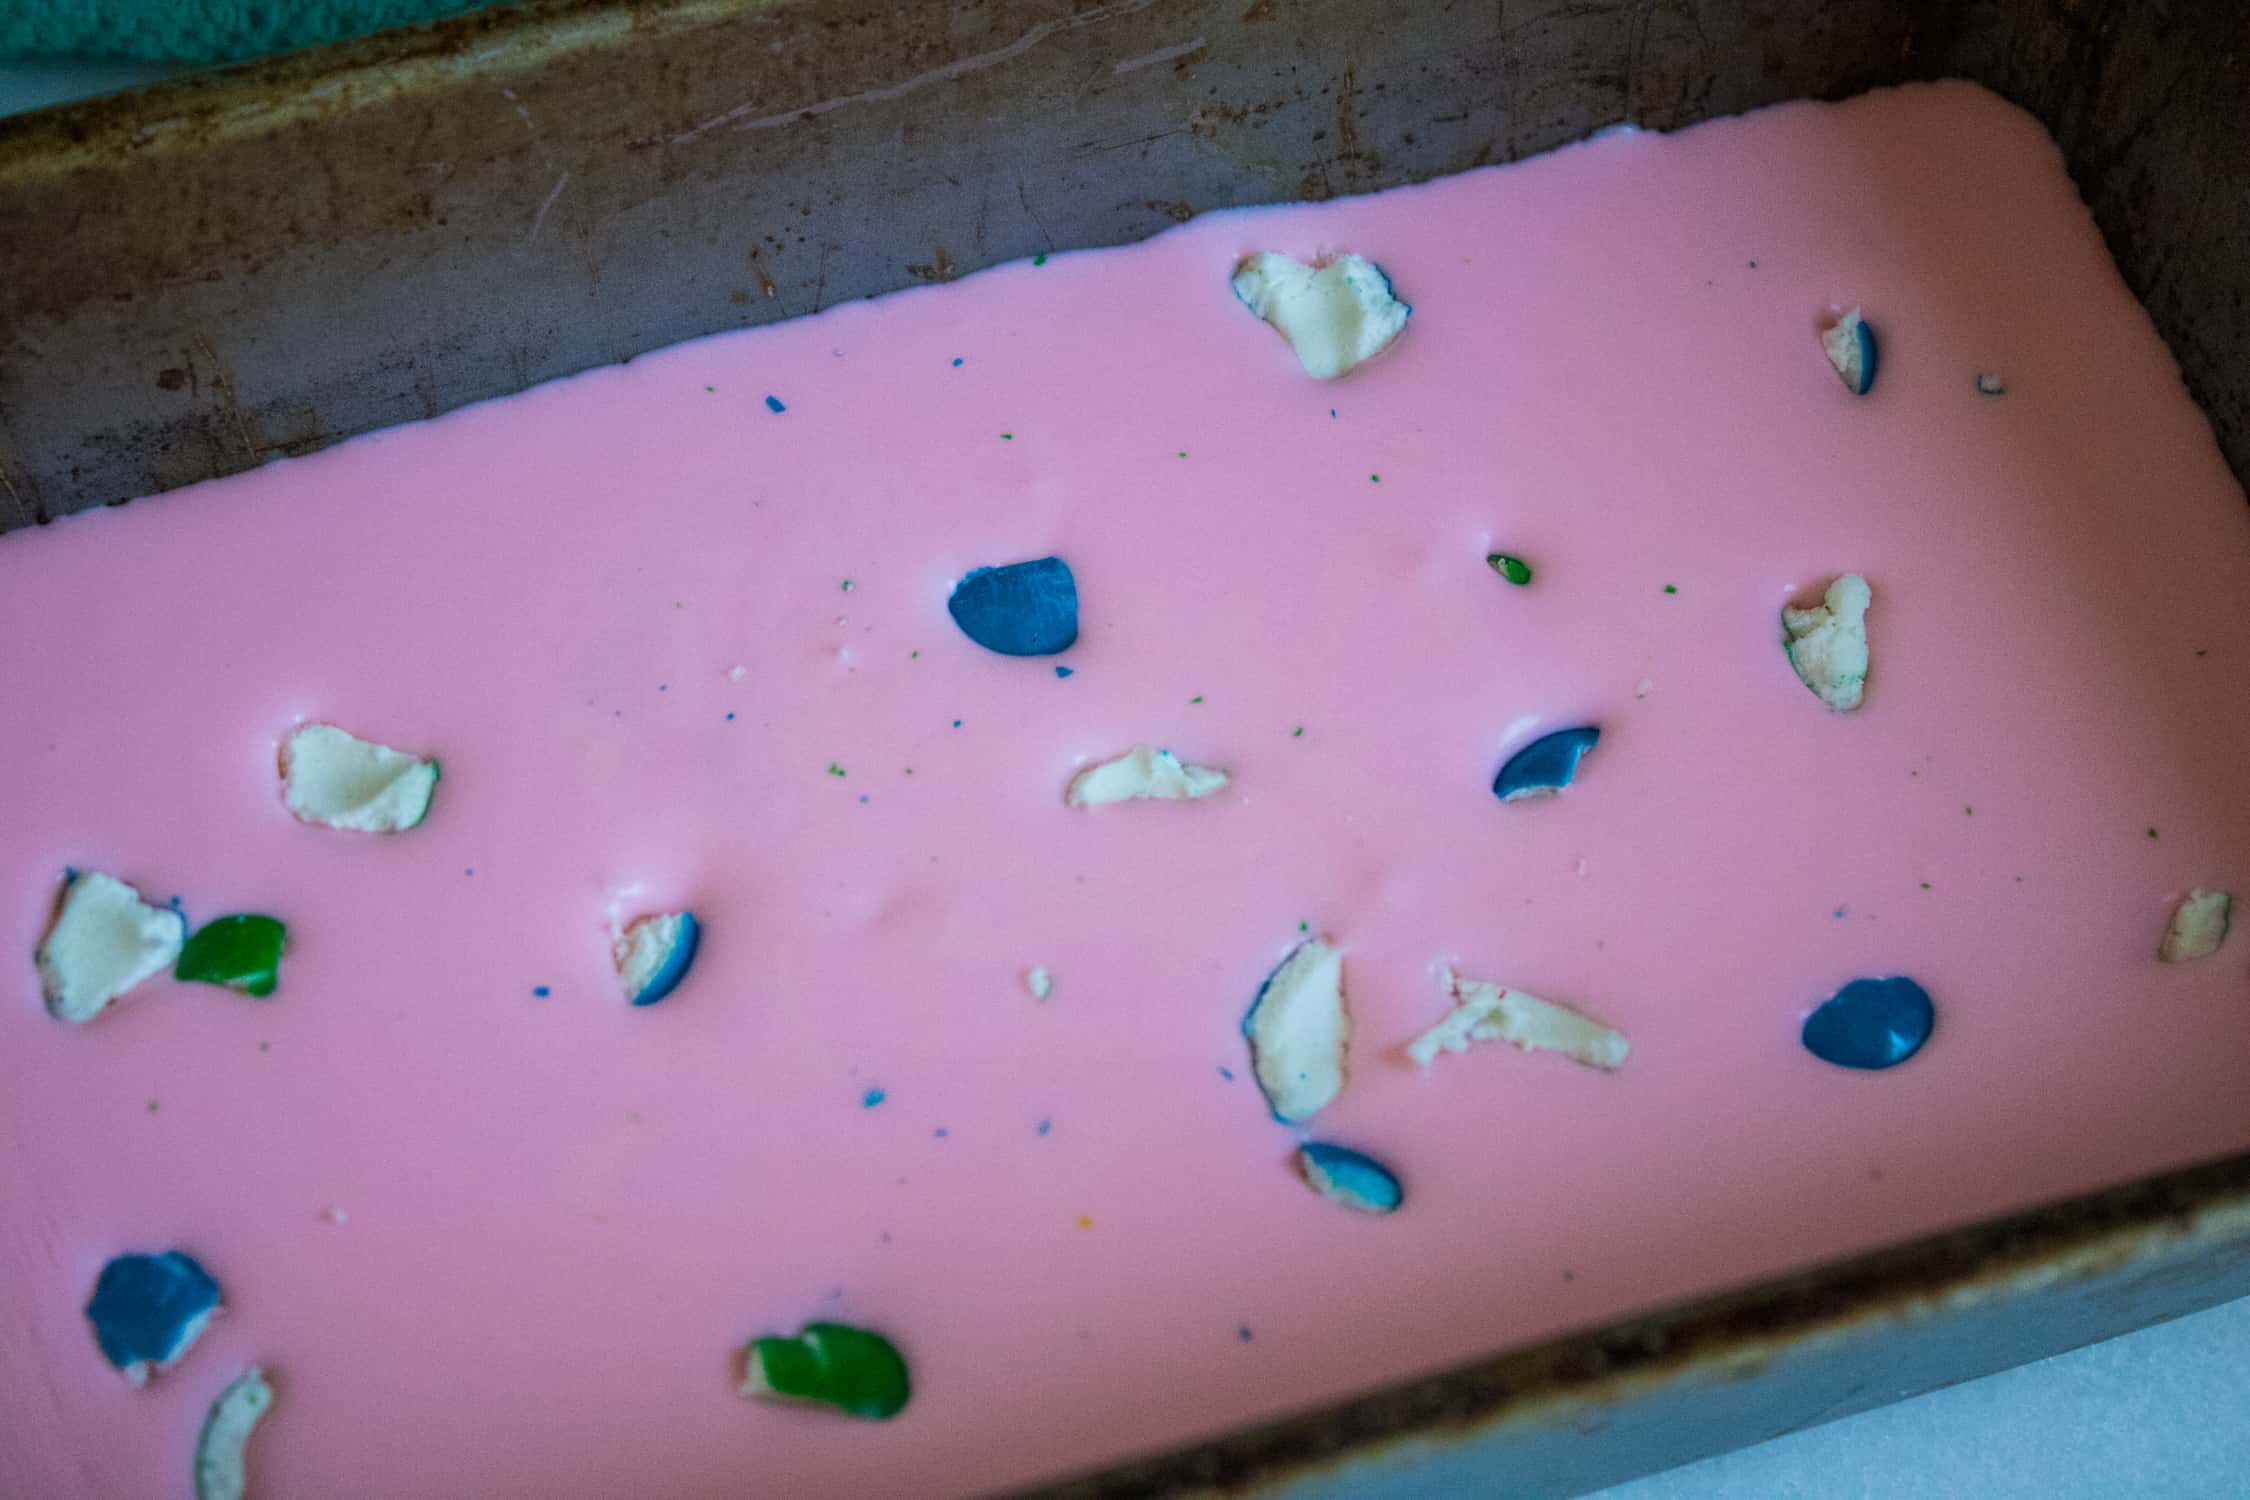 oblong pan with pink no-churn ice cream in it with gumball pieces scattered on top in white blue and green